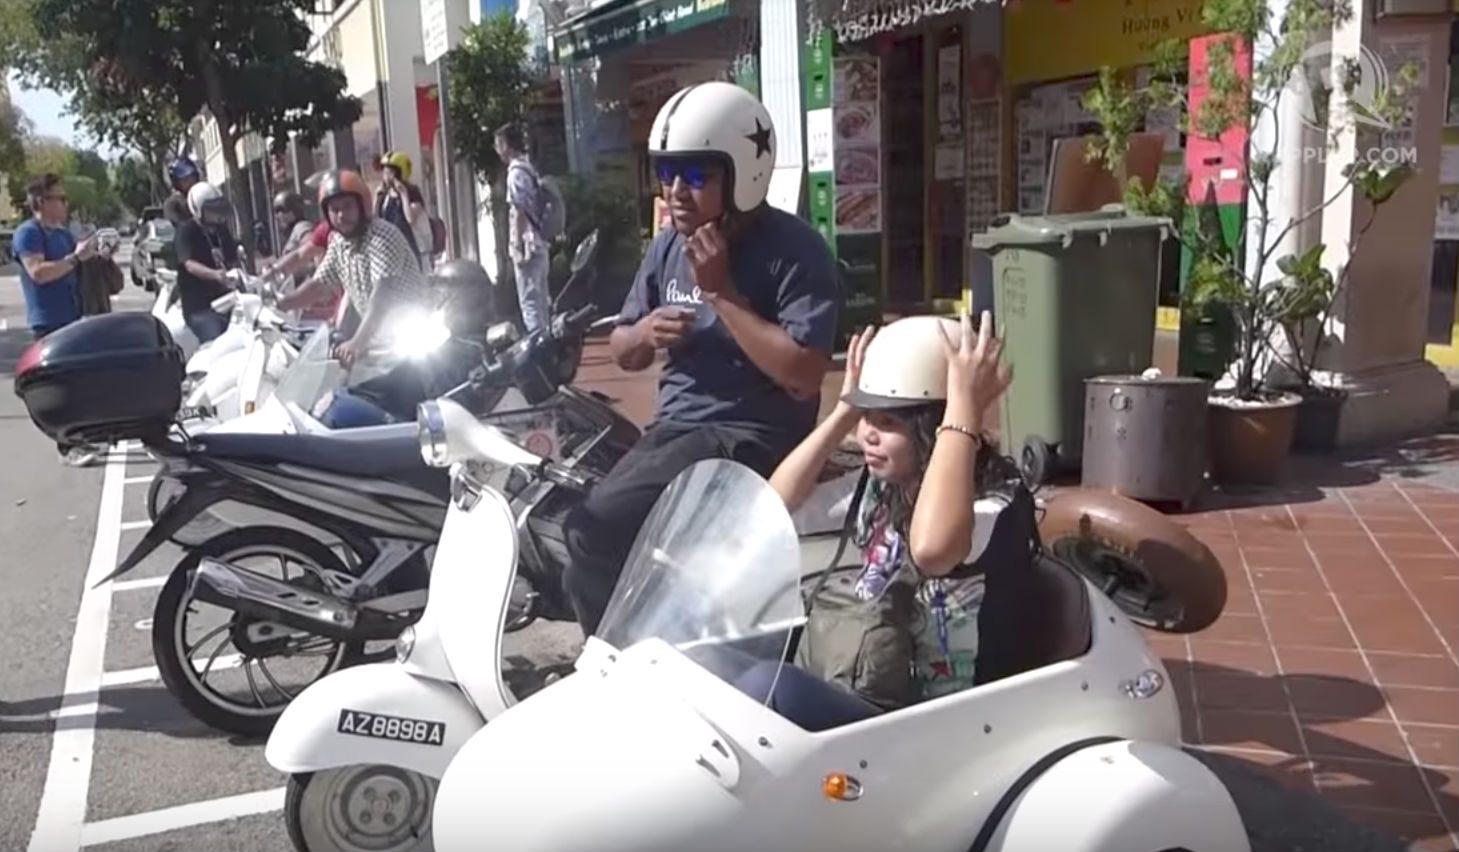 A Singapore Minute (Part 3 of 5): Tour the city on a Vespa sidecar